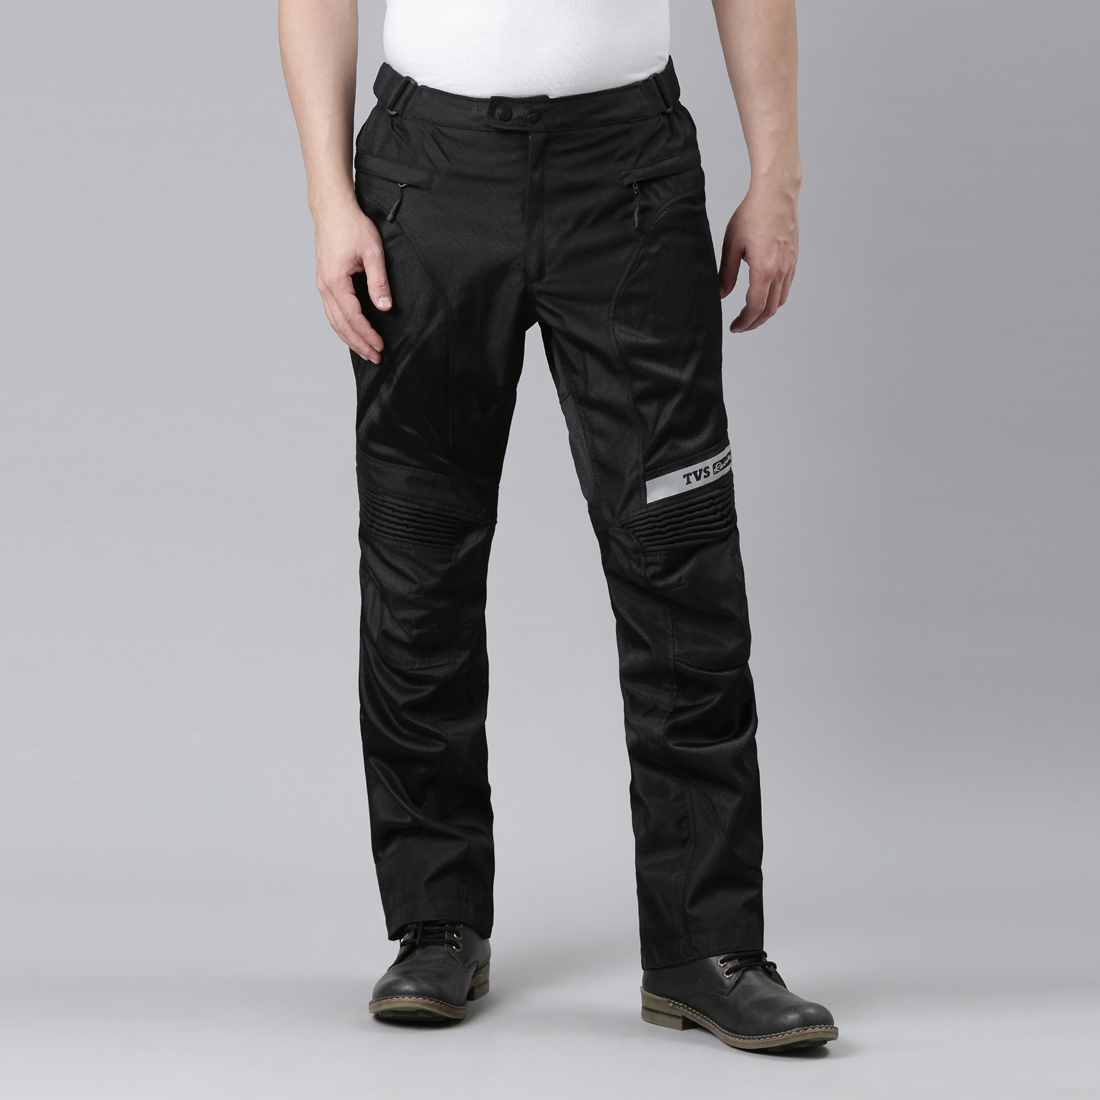 Motorcycle Riding Pants For Men Protective Moto Jeans For Motorbike Riding  And Motocross Mens Athletic Pants 230824 From Quan02, $21.14 | DHgate.Com